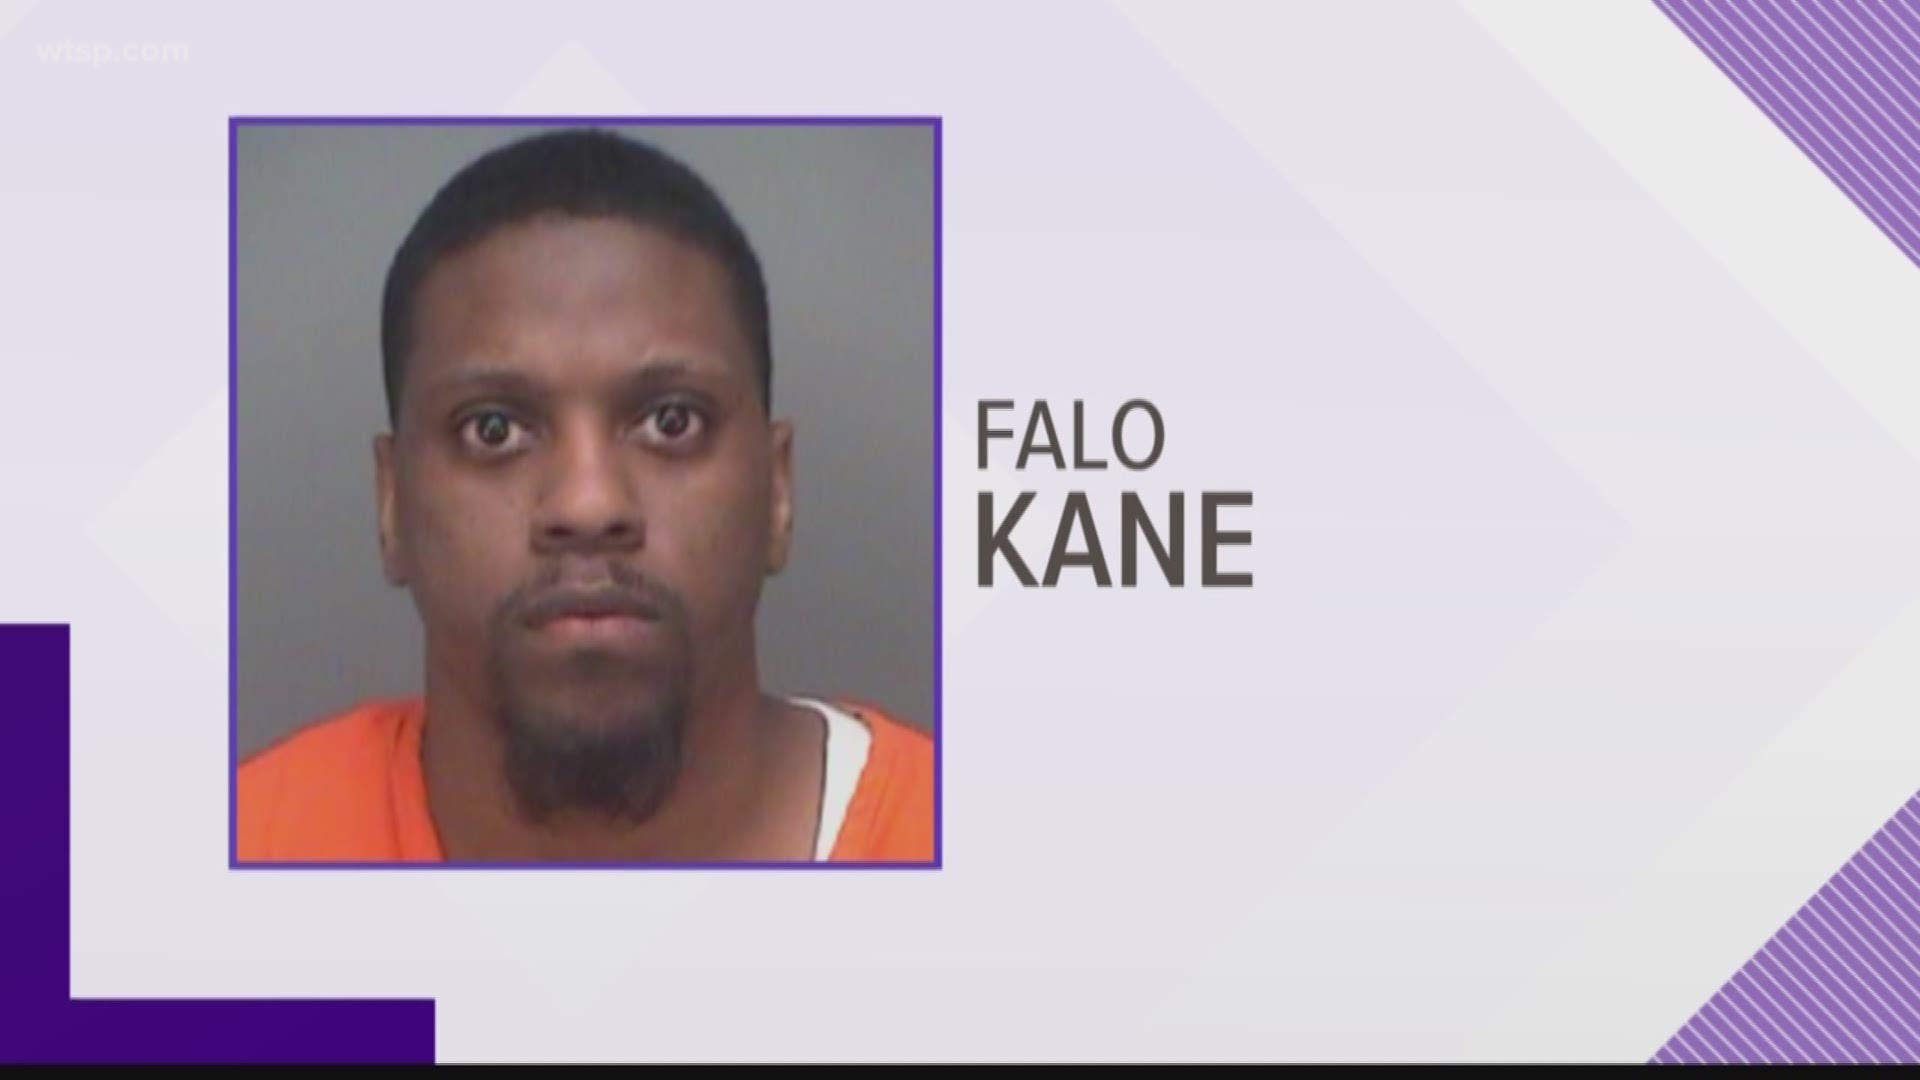 According to arrest reports, Falo Kane, 32, admitted he sexually battered two different women in 2016. Police say Kane also admitted to sexually battering two other women in March 2019 and September 2019.  https://on.wtsp.com/2kmxHQF